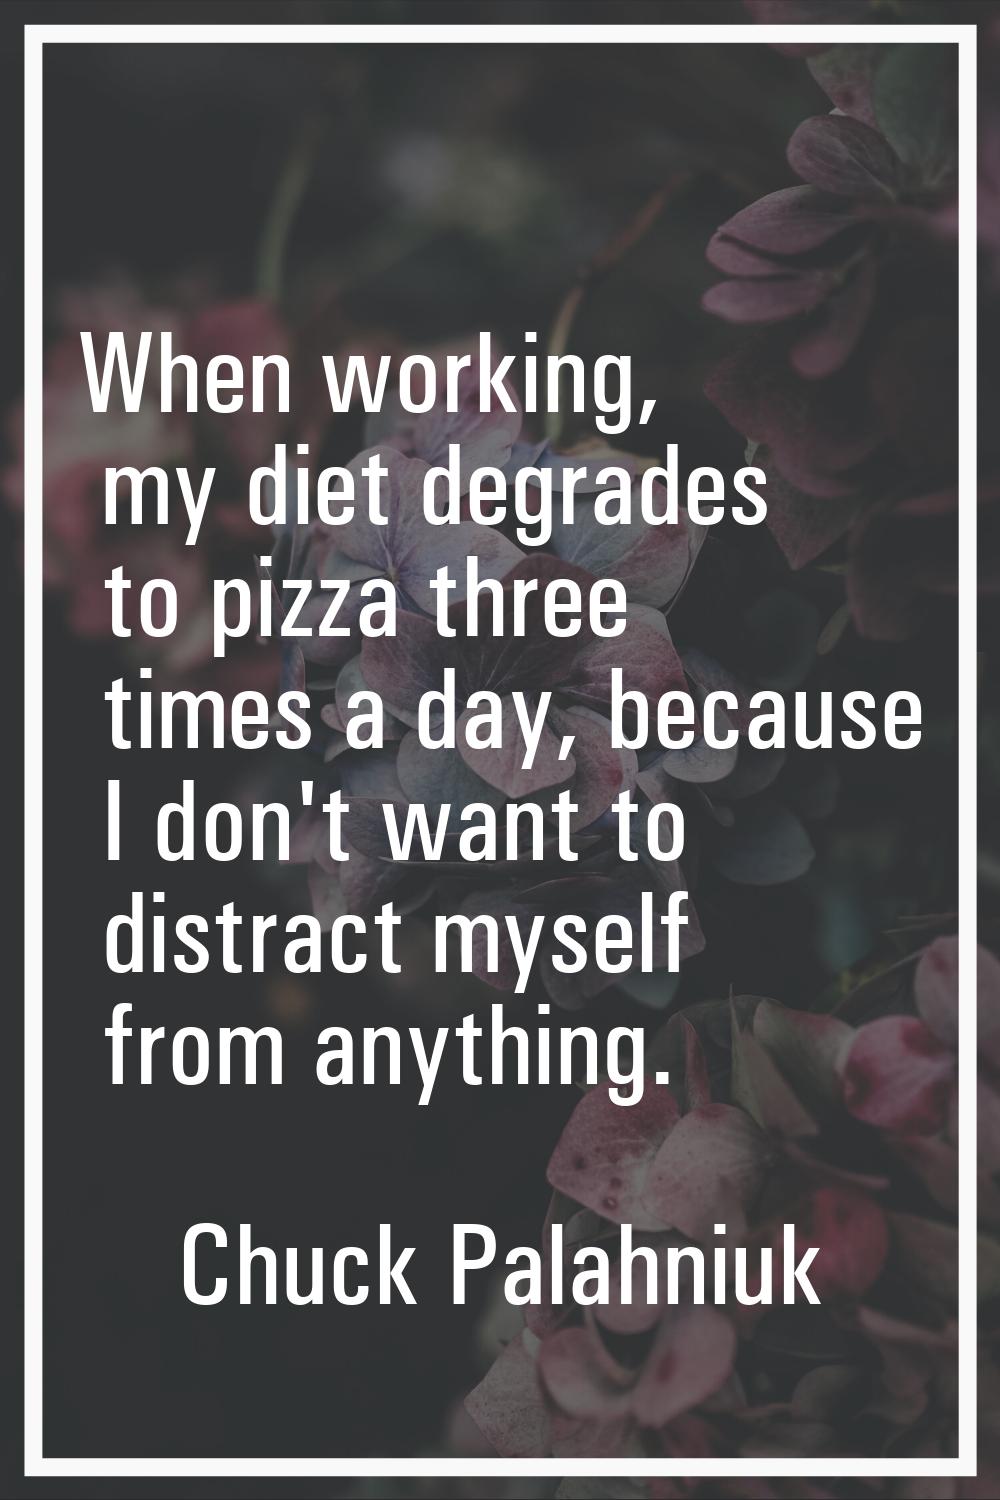 When working, my diet degrades to pizza three times a day, because I don't want to distract myself 